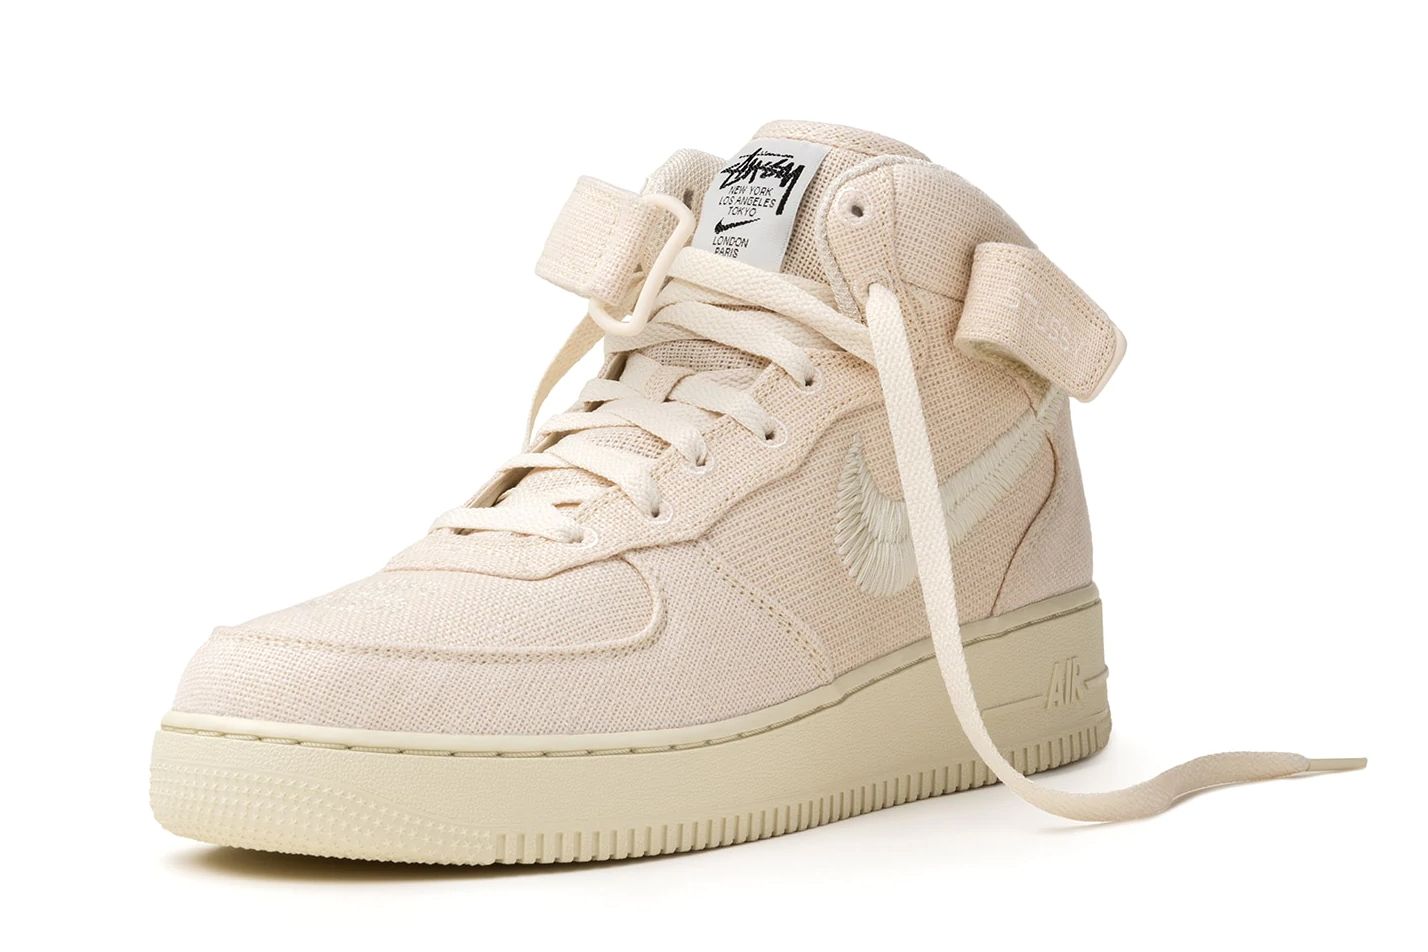 Stussy x Nike Air Force 1 Mid Release Date